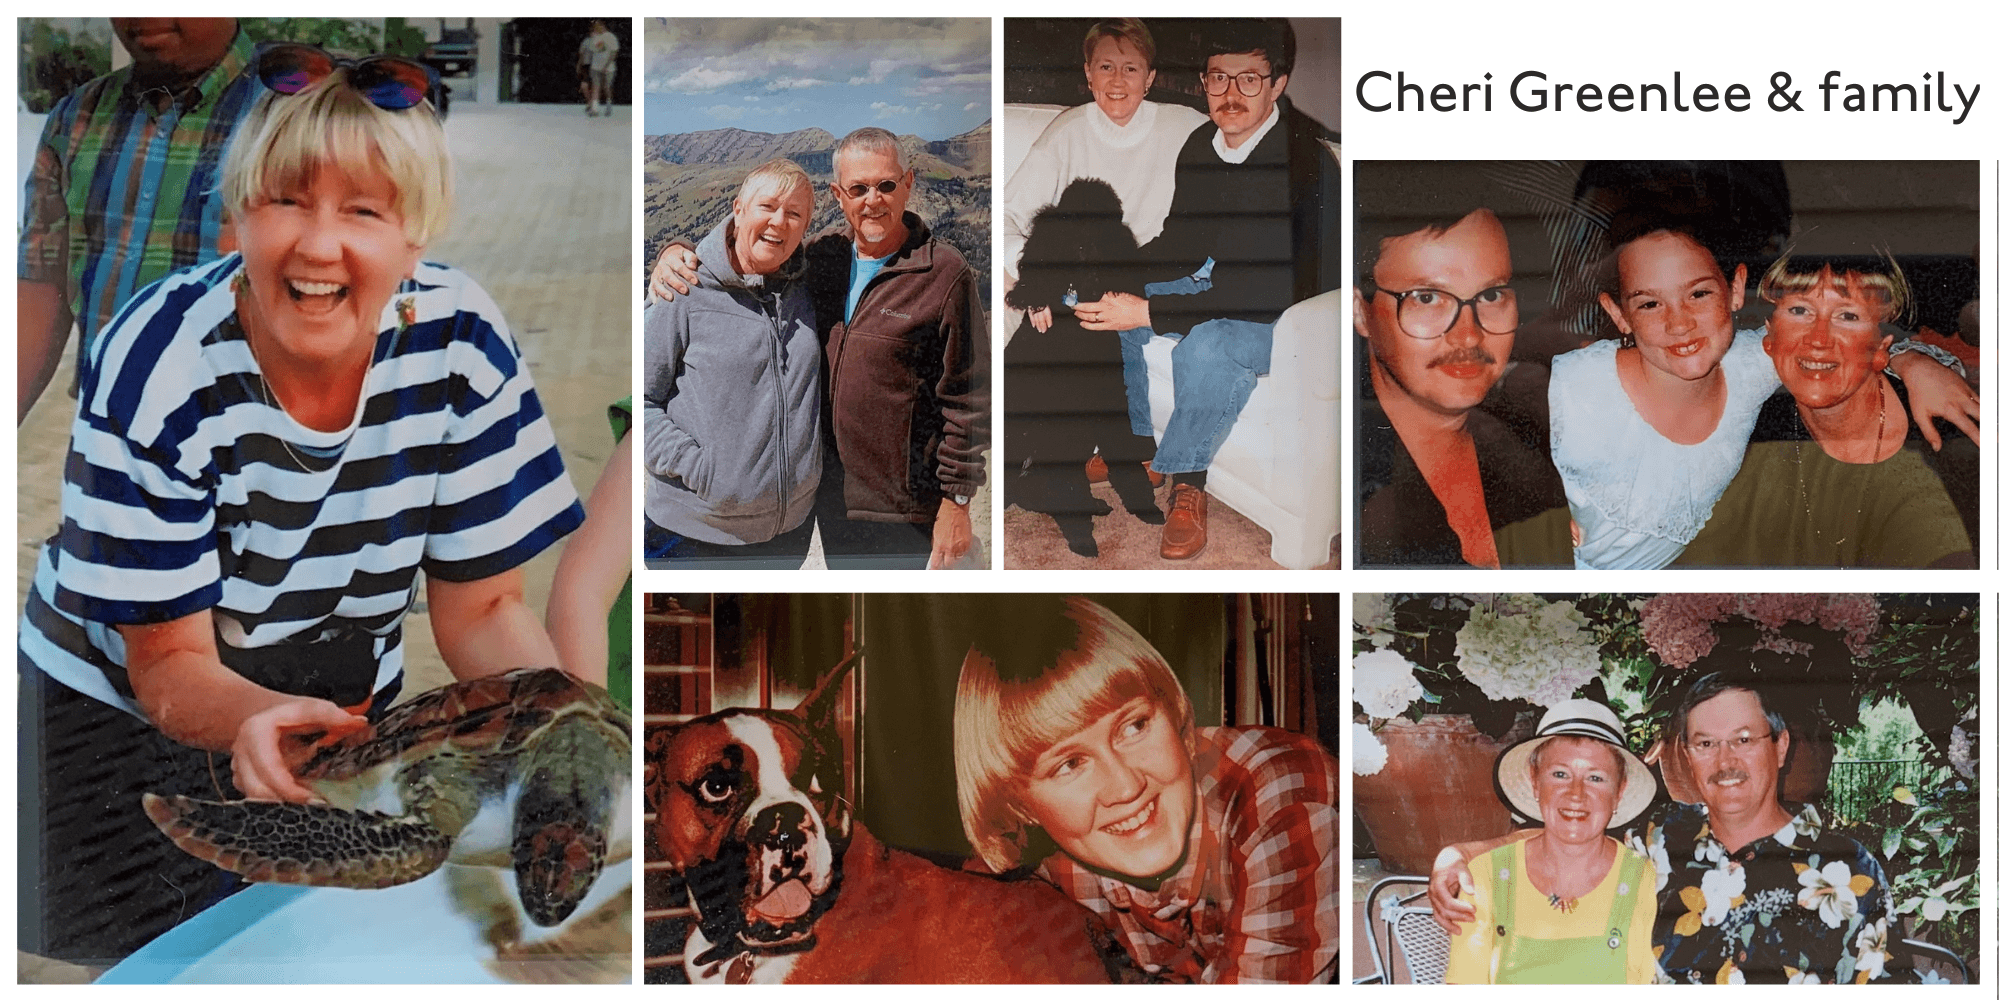 Pictures of Cheri Greenlee and her family